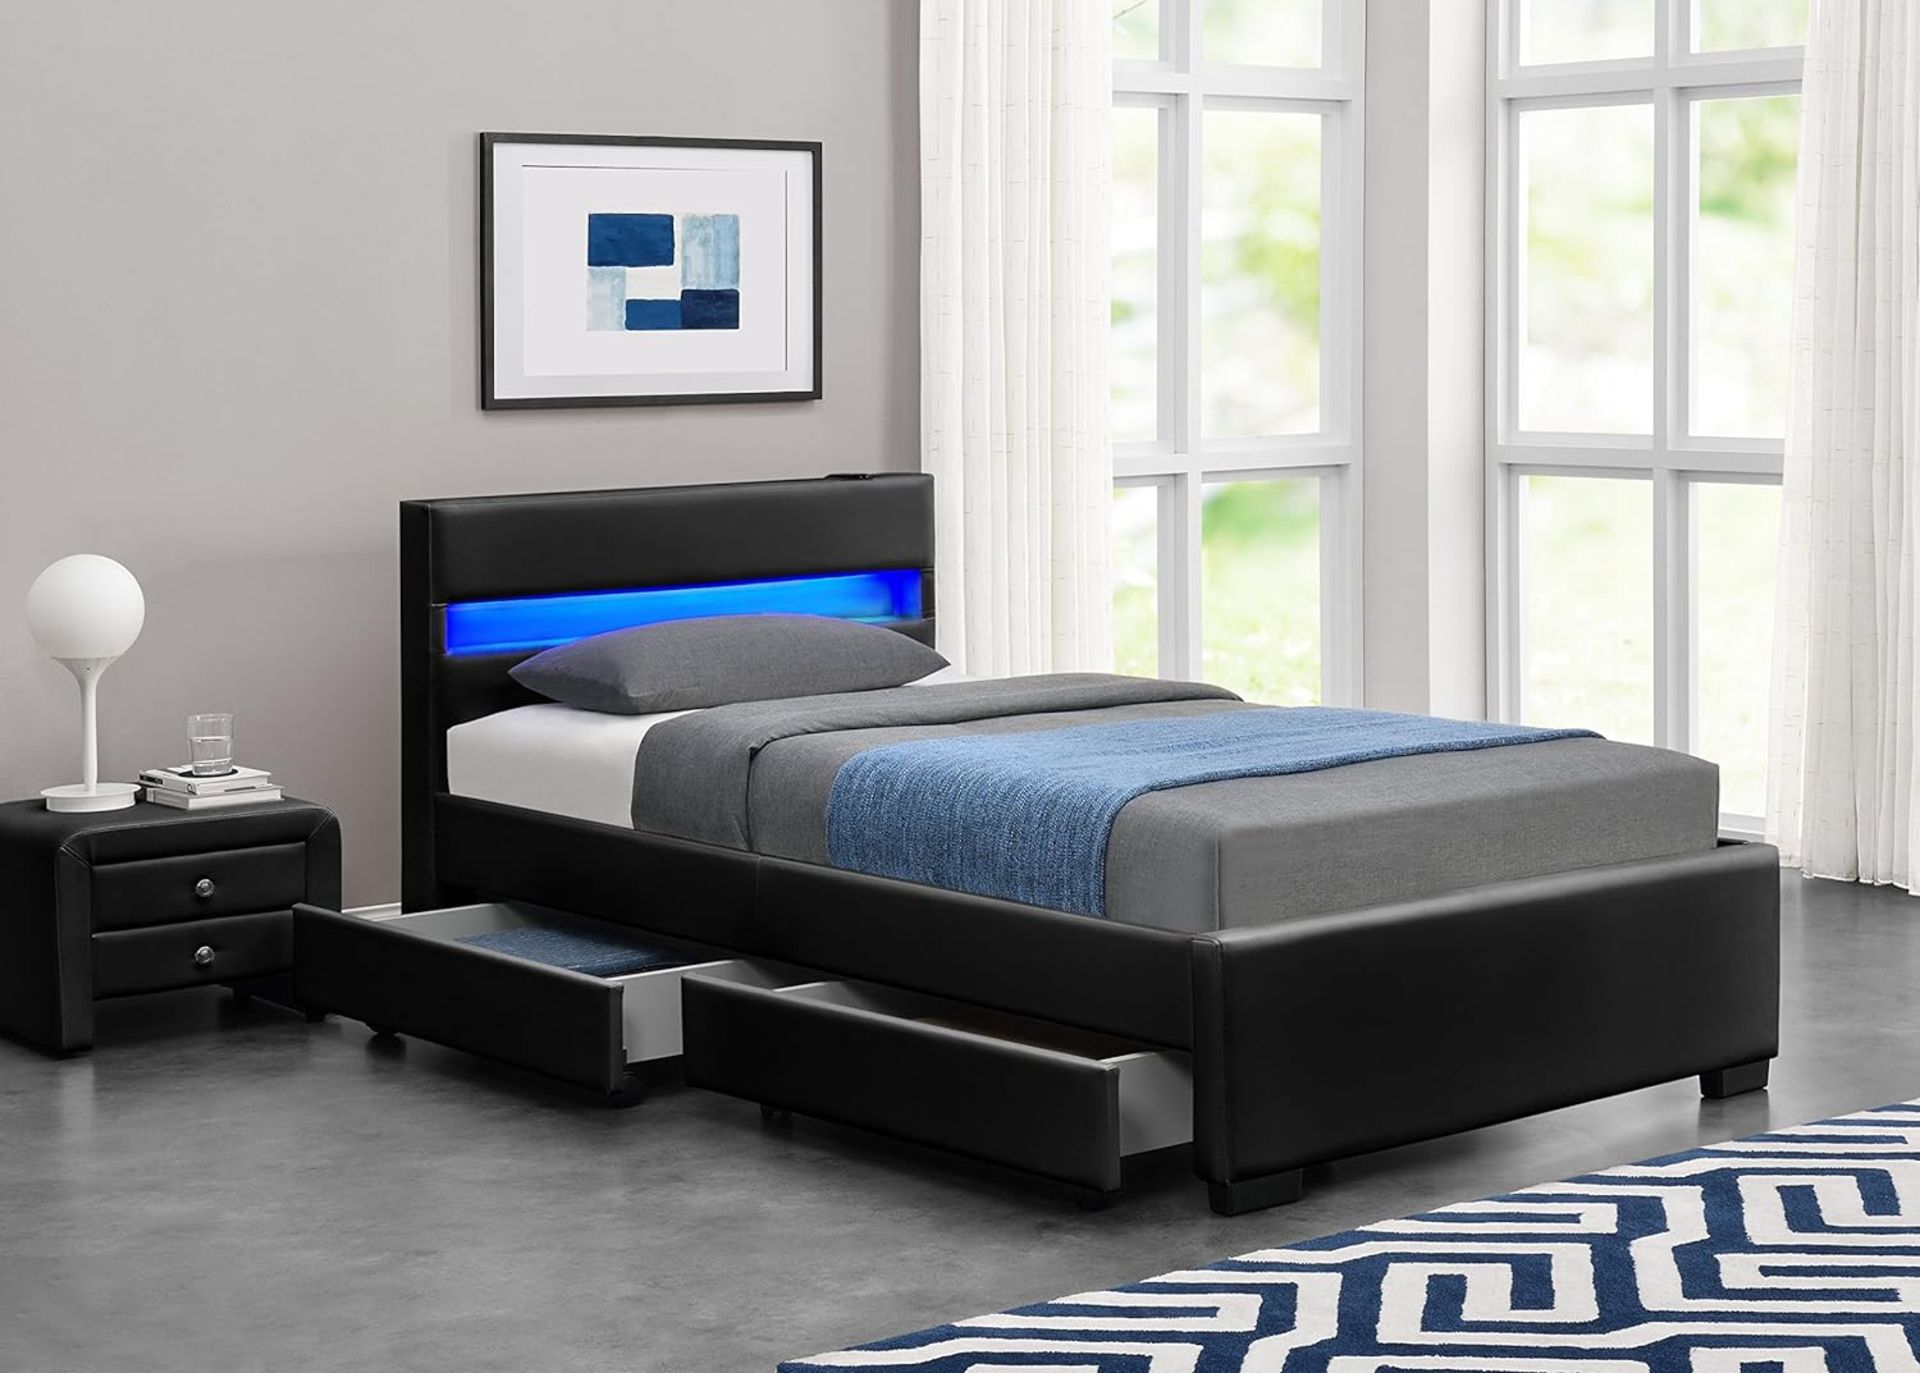 DESIGNER MUSIC BED, BLUETOOTH, SPEAKERS, LED COLOUR CHANGING FAUX LEATHER BED FRAME WITH REMOTE - Image 2 of 4